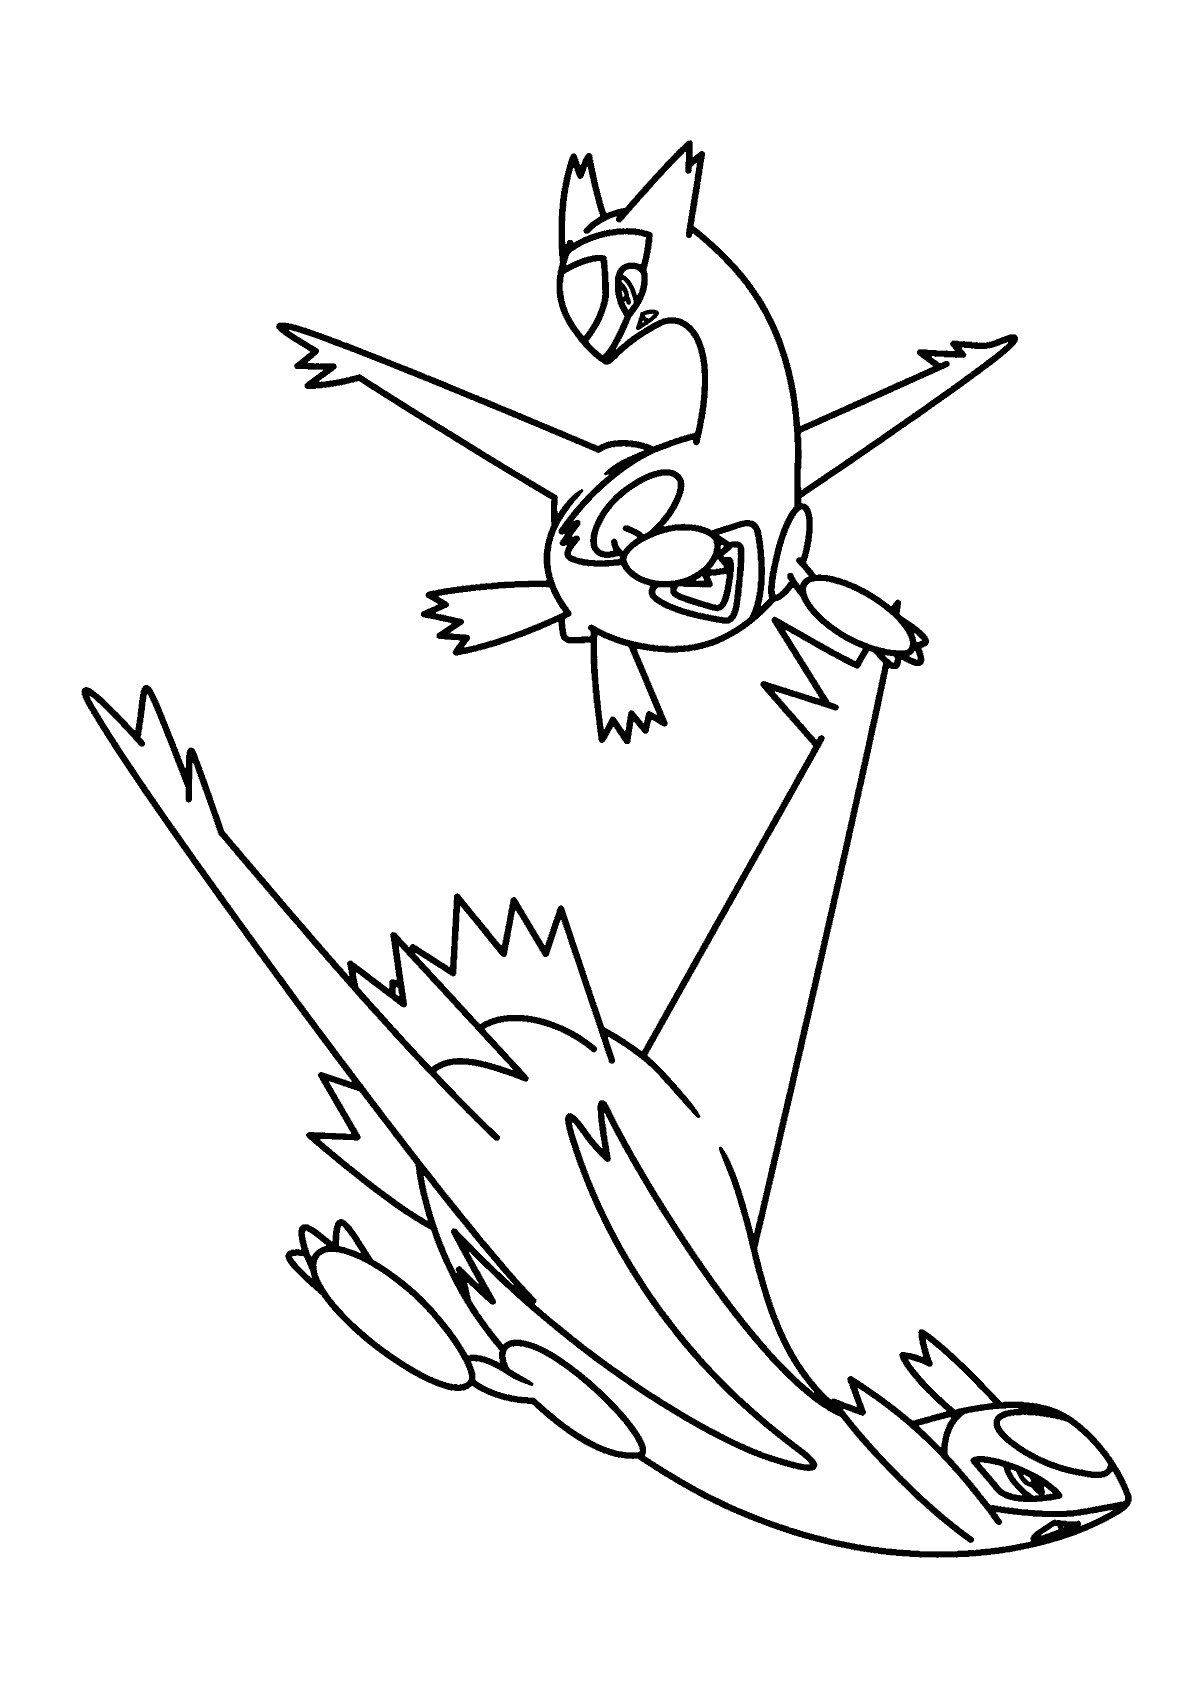 coloring page: Two dragon-like Pokémon w/ long necks, wings & antler-like horns: Latias has red gem on chest, Latios blue gem on forehead & tails w/ red/blue tip.